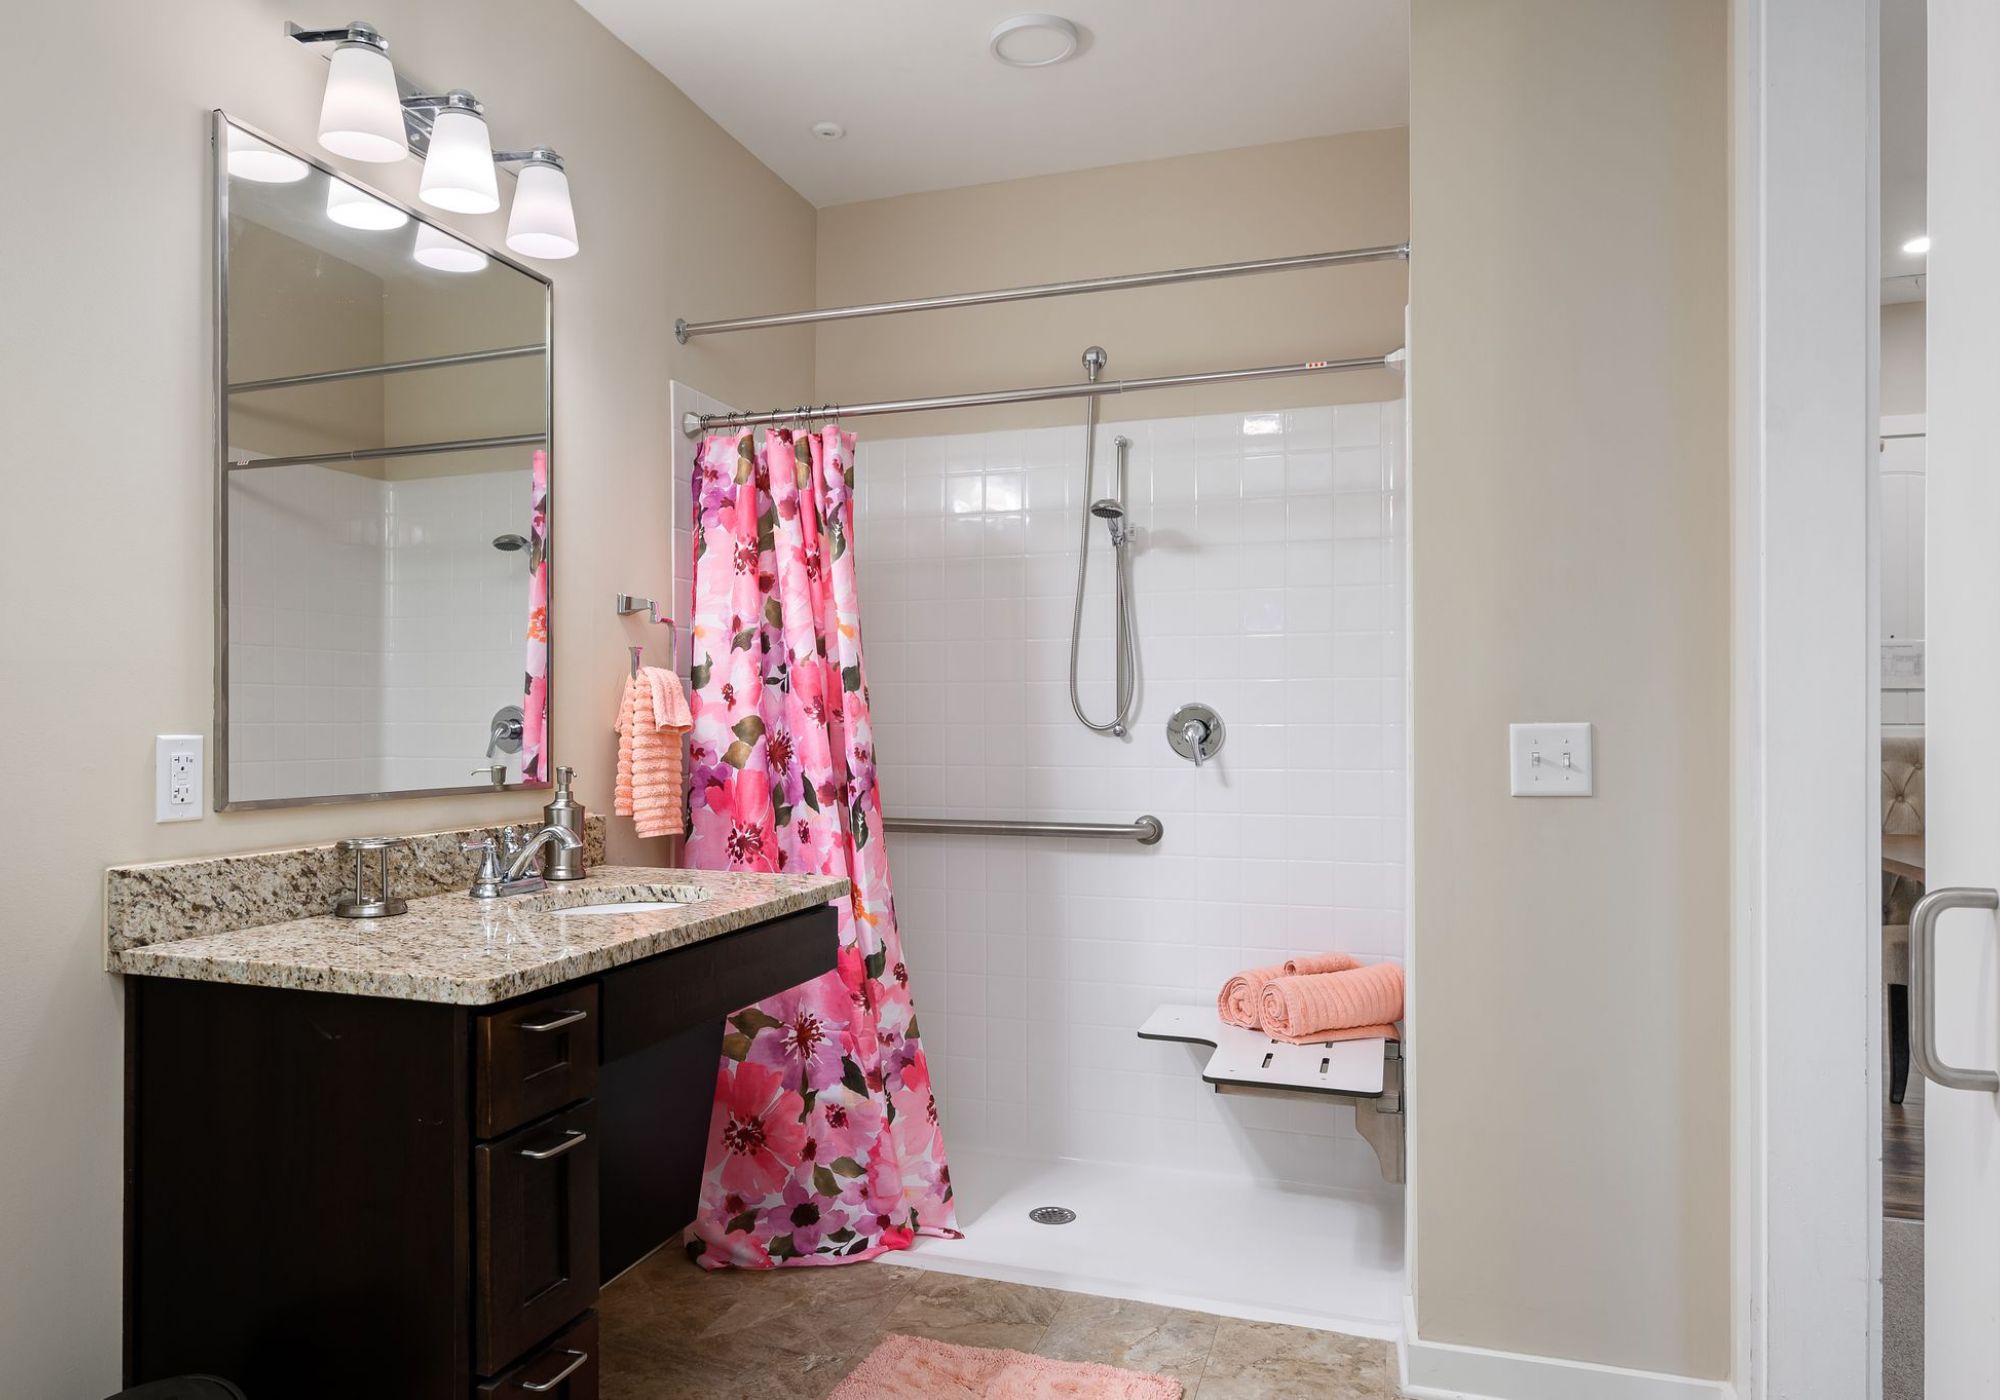 The Claiborne at Shoe Creek senior living community bathroom showing accessibility features including handrails, lower sink height, and zero-entry shower